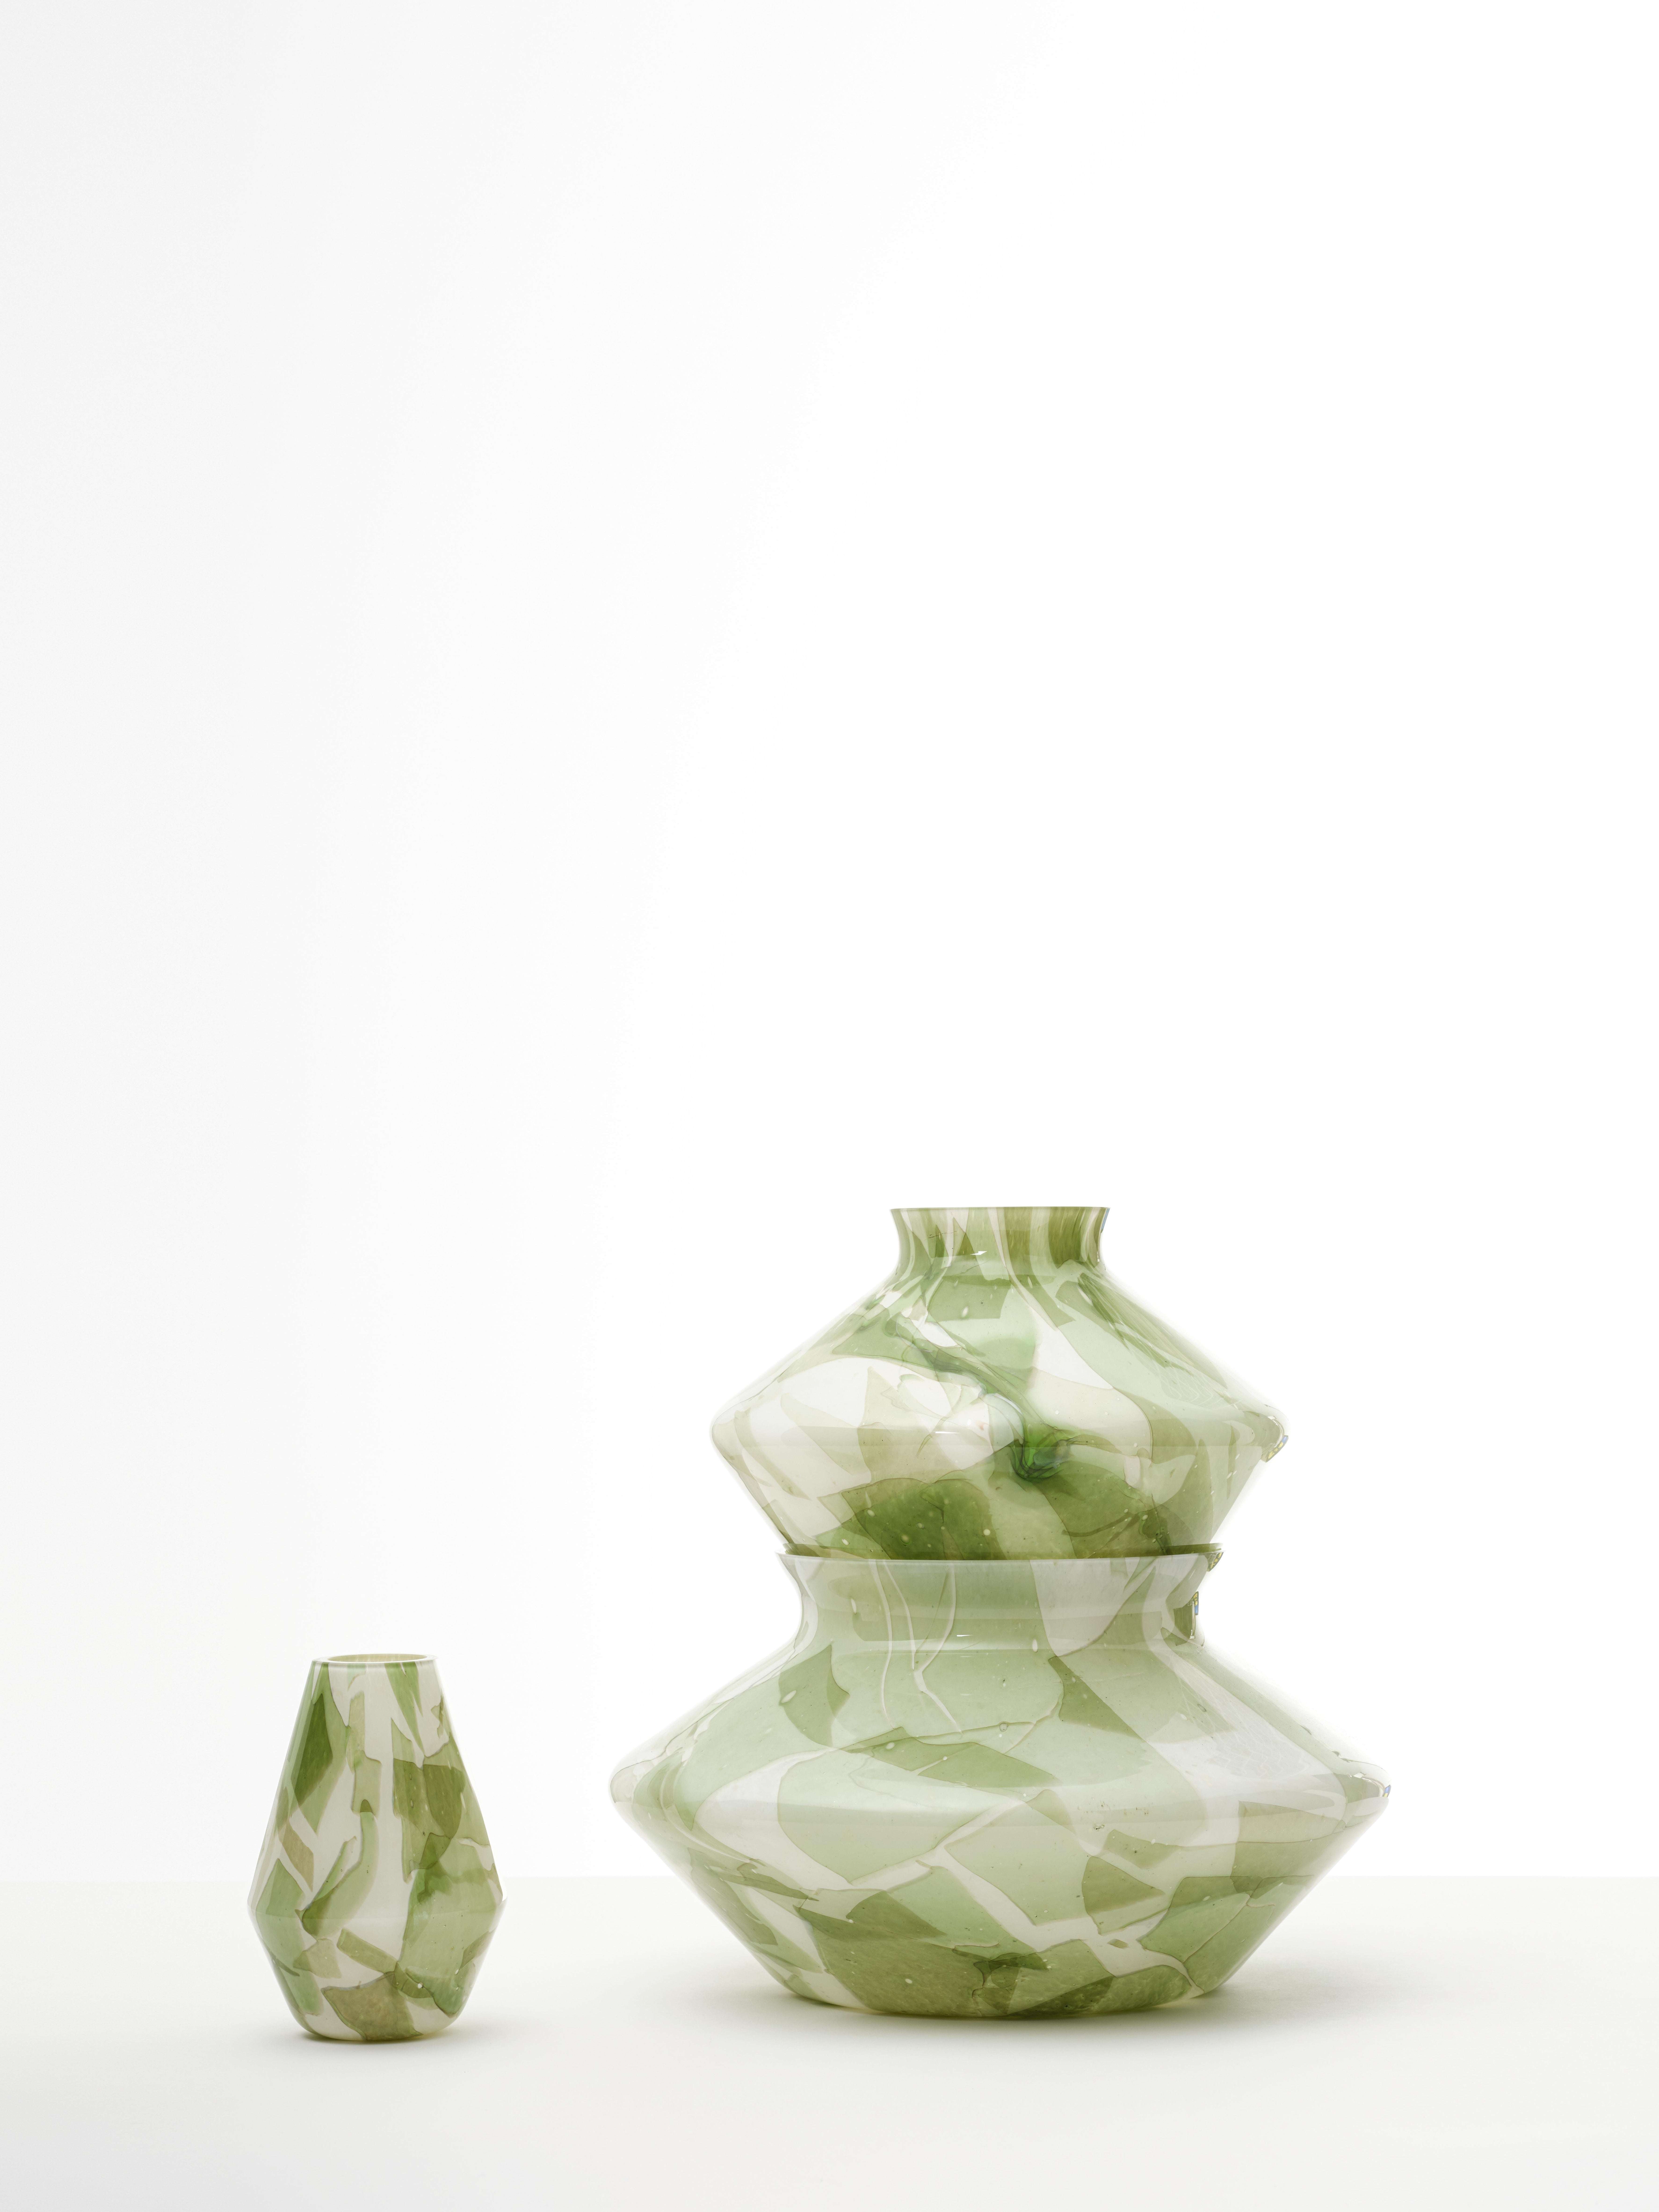 Murano Glass Jade Variopinto Trio of Vases by Stories of Italy with Alberto and Francesco Meda
“In 2010, Borek Sipek invited myself and designers Andrea Branzi, Ron Arad, Oscar Tusquets and Nanda Vigo to design a blown glass object that would be